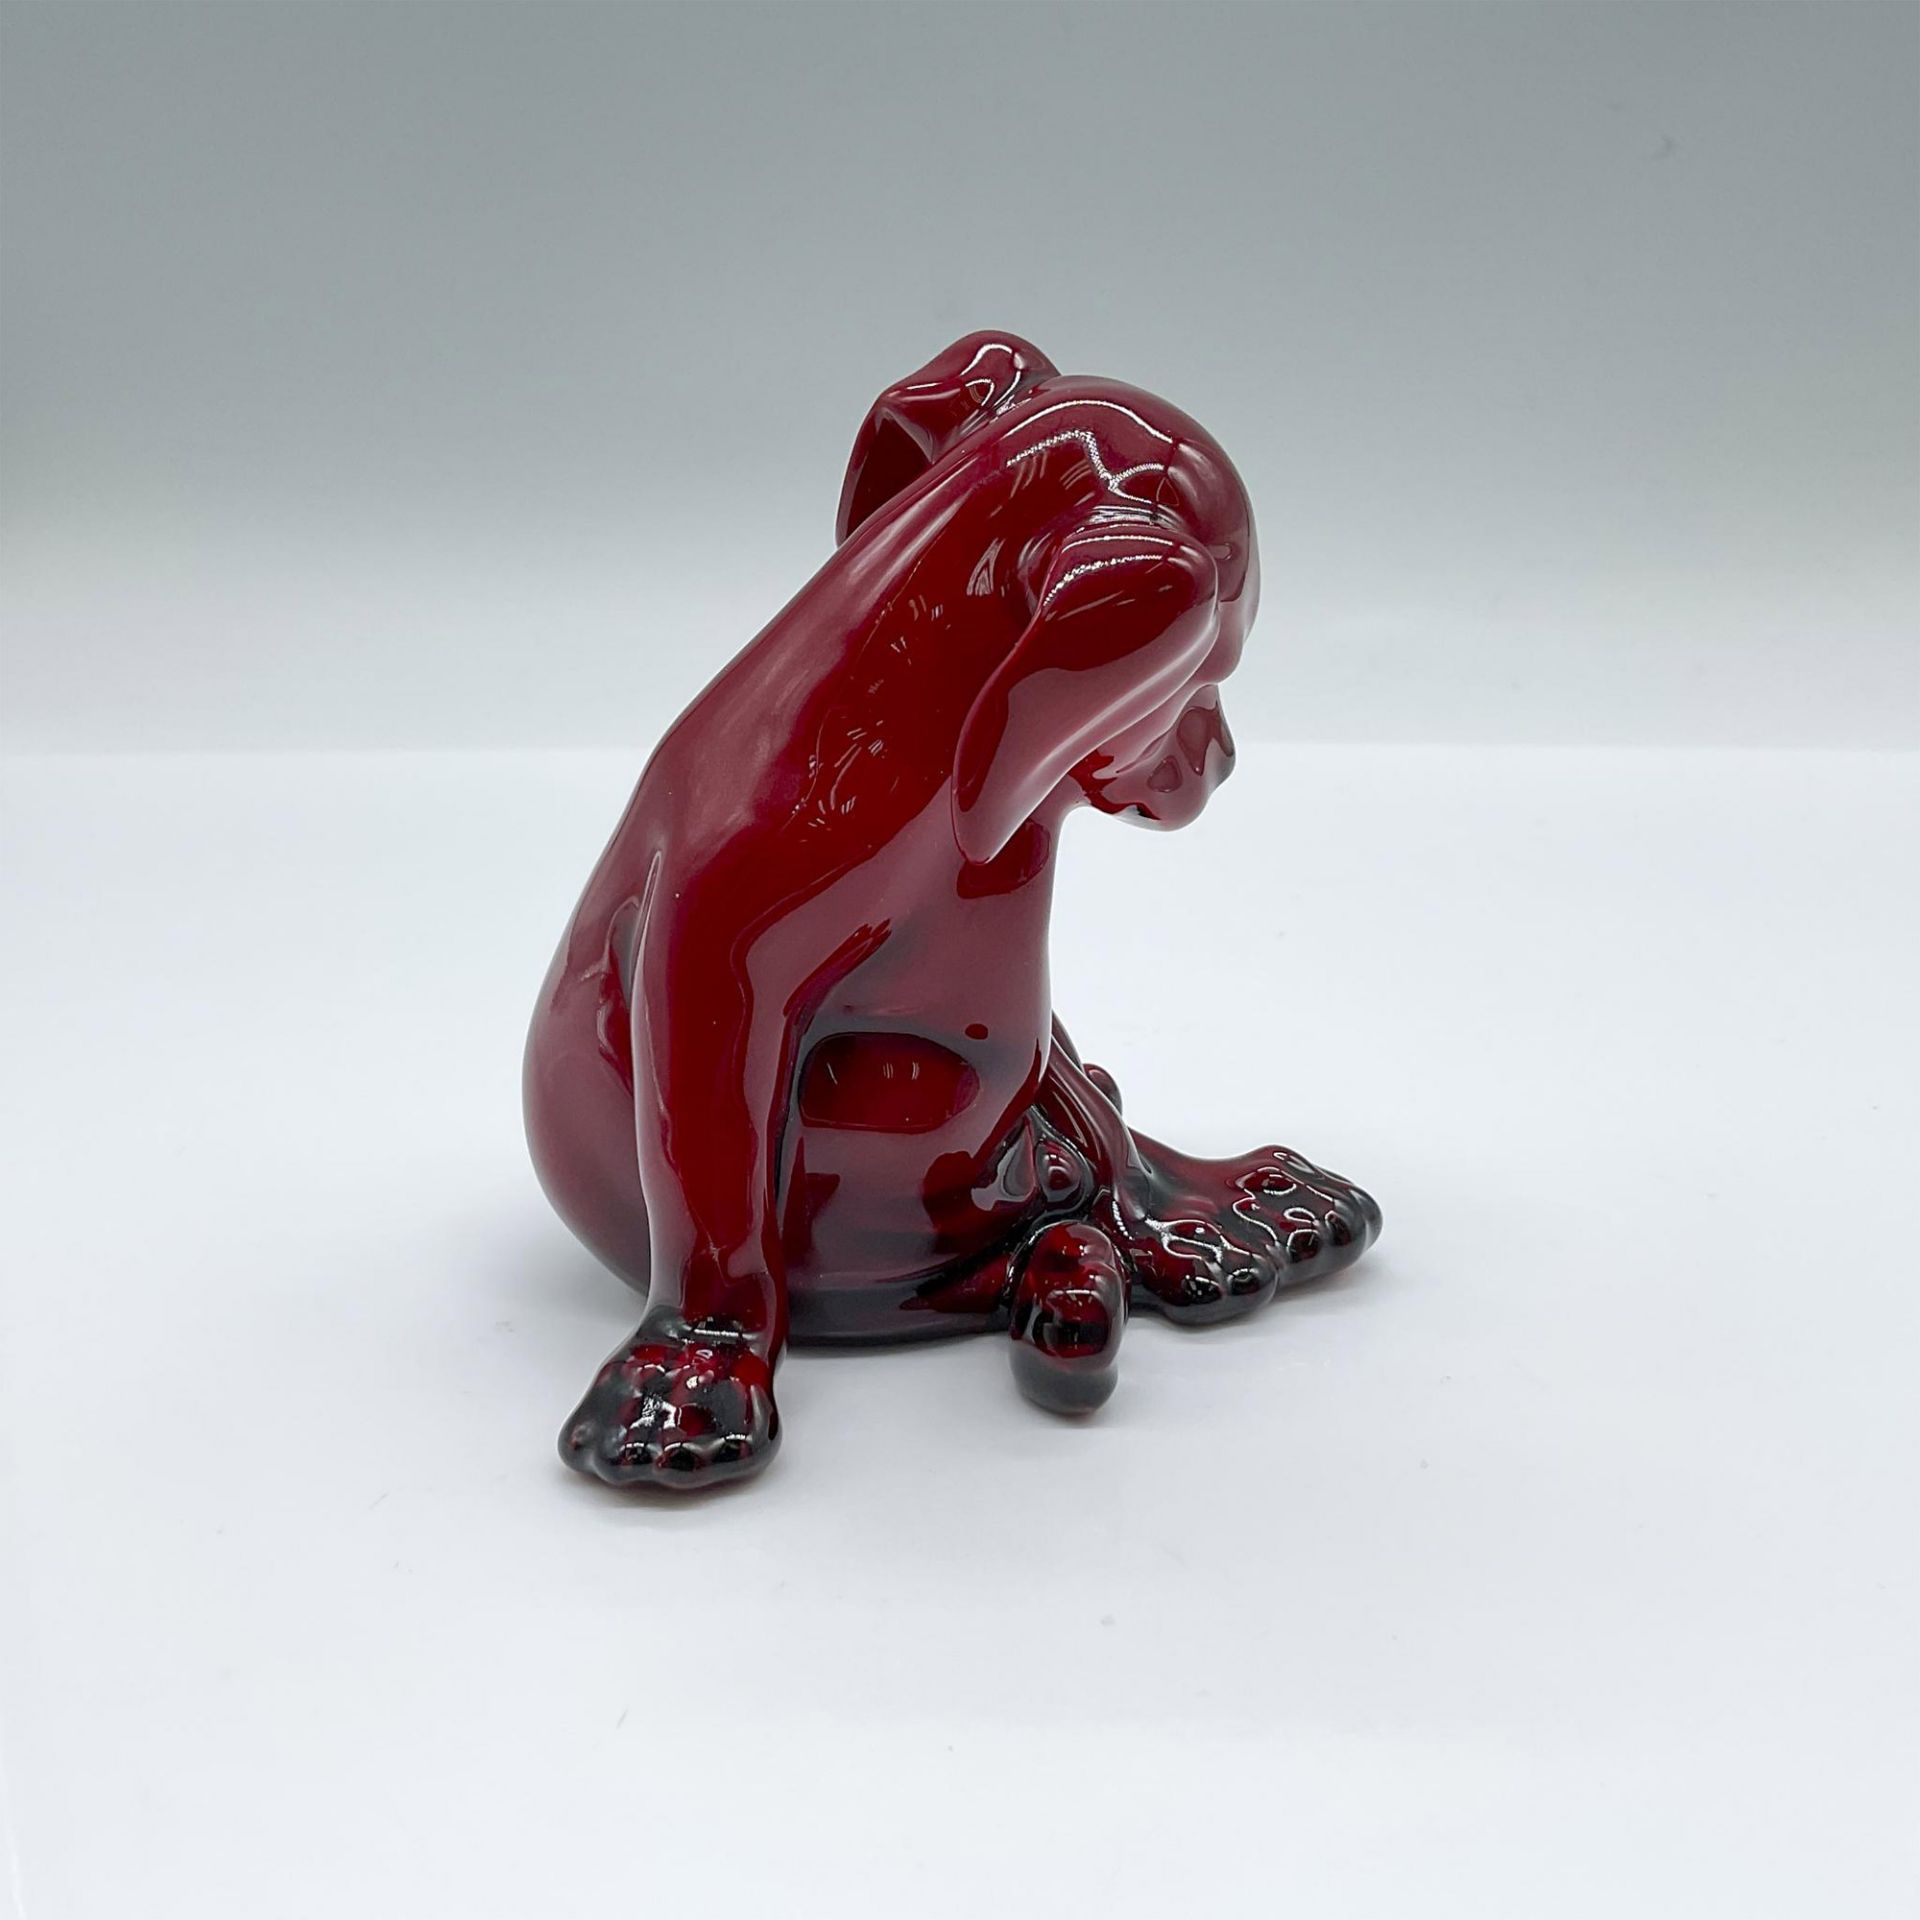 Royal Doulton Flambe Figurine, Puppy - Seated HN128 - Image 2 of 4